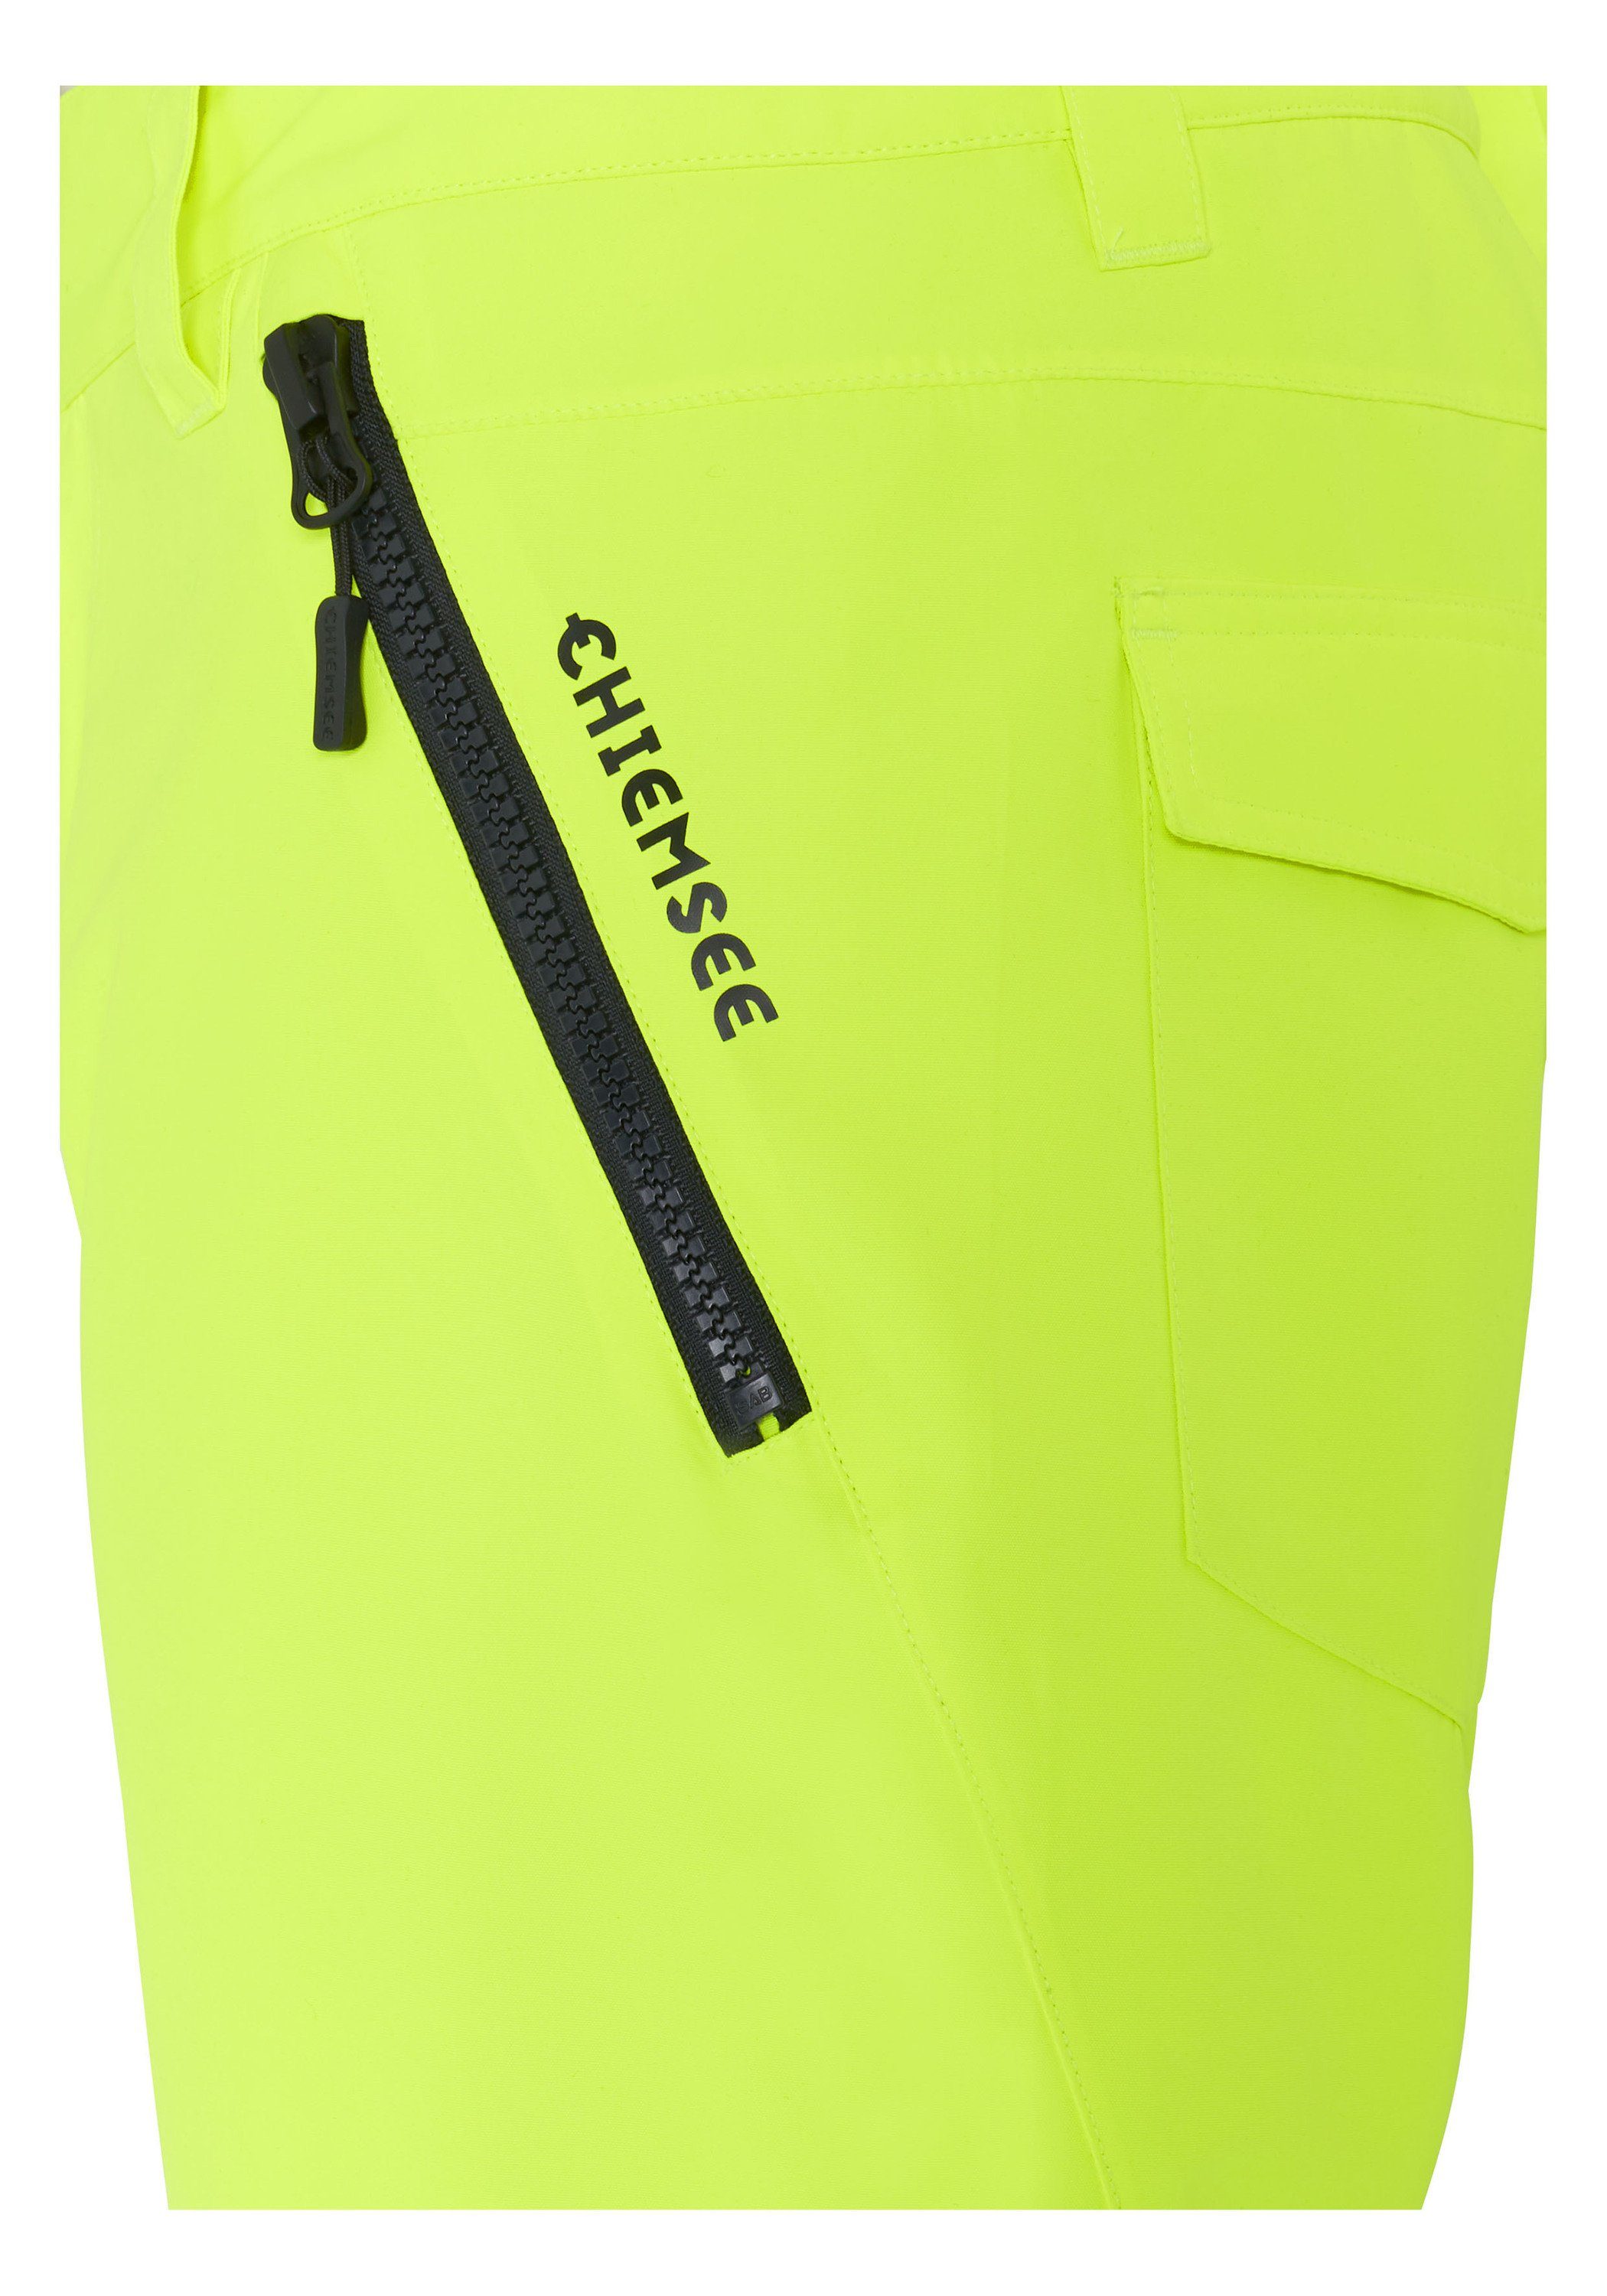 Schneefang Yellow mit Sporthose (1-tlg) Safety Chiemsee